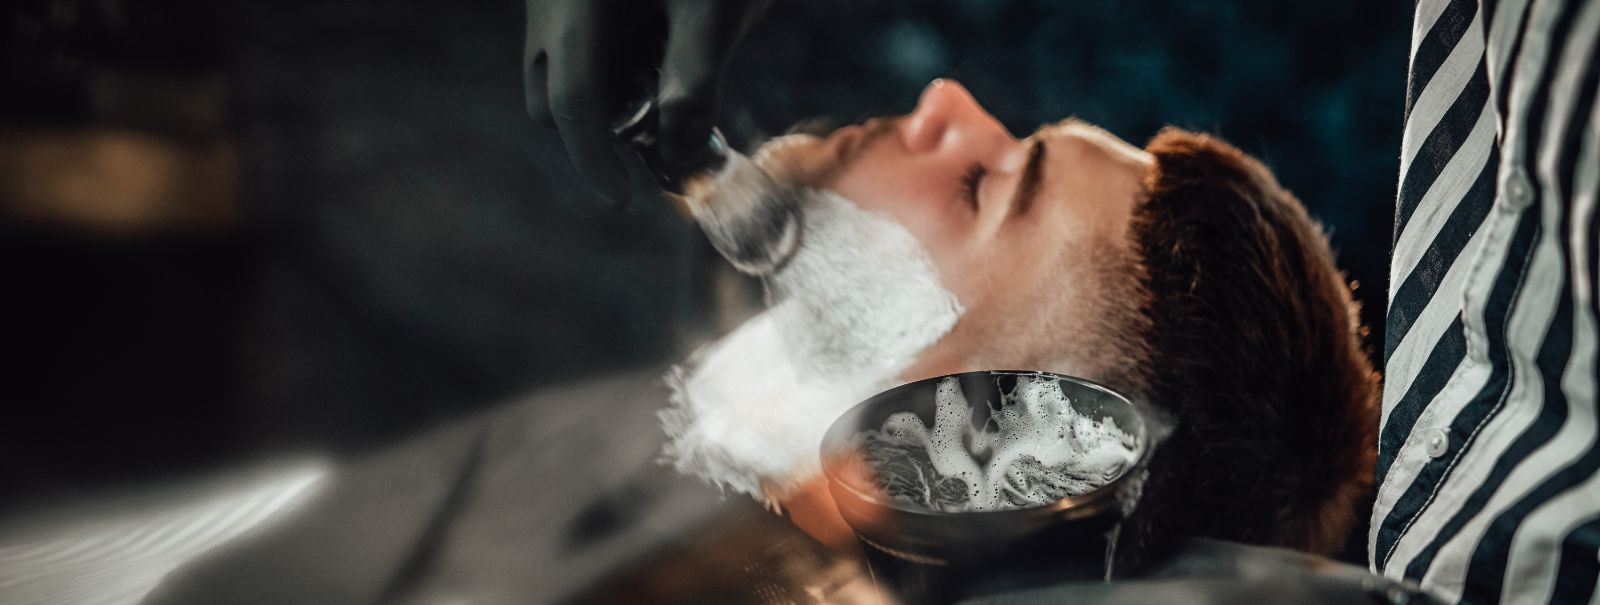 The hot towel shave, a hallmark of traditional barbering, is a ritual that dates back centuries. It was once a weekly necessity for gentlemen seeking a clean ap